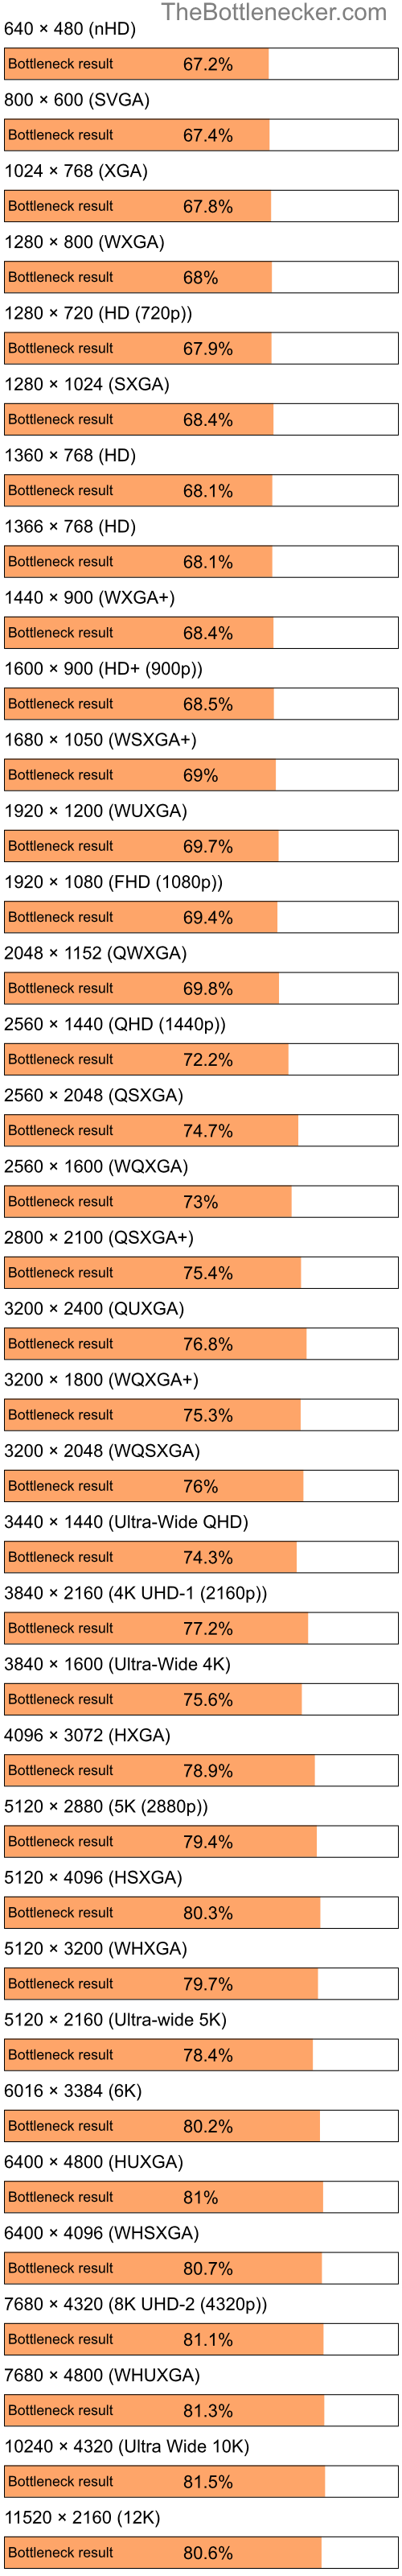 Bottleneck results by resolution for Intel Celeron and AMD Mobility Radeon 9600 in Processor Intense Tasks